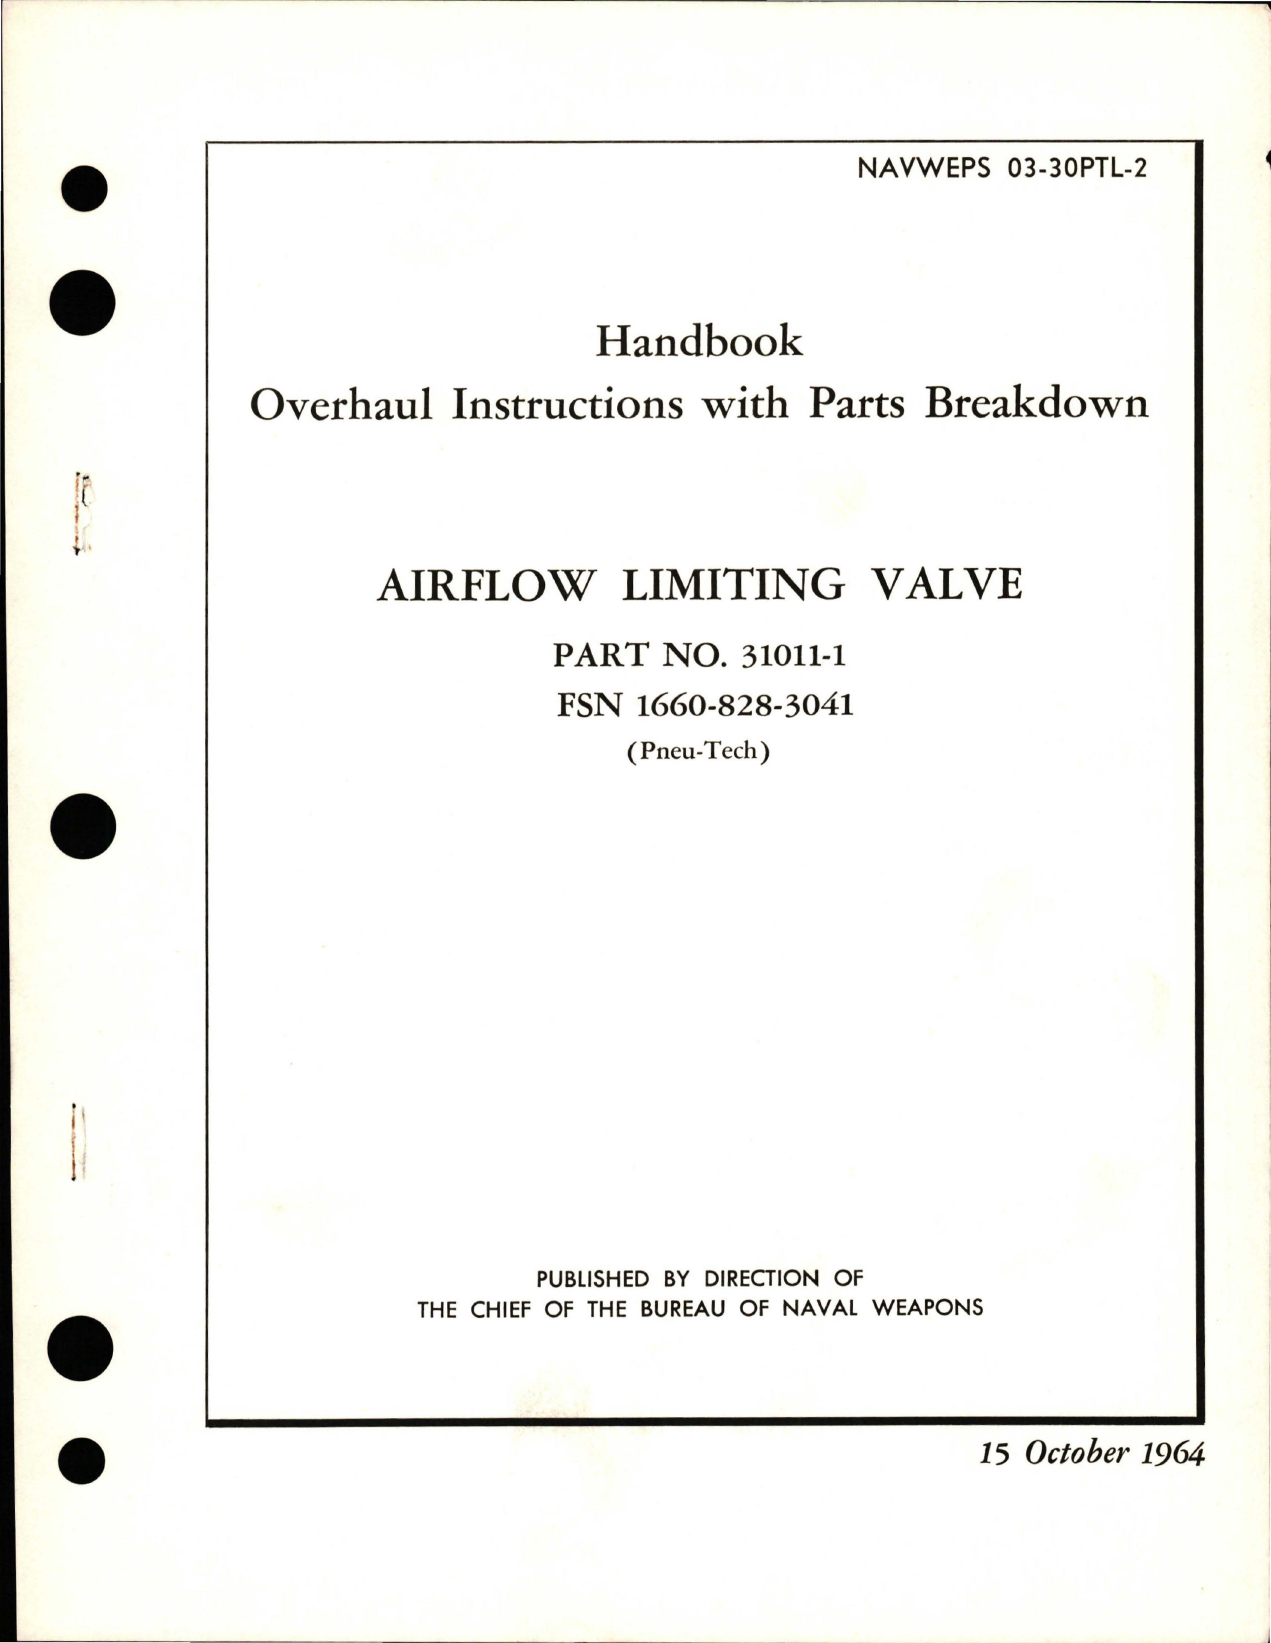 Sample page 1 from AirCorps Library document: Overhaul Instructions with Parts Breakdown for Airflow Limiting Valve - Part 31011-1